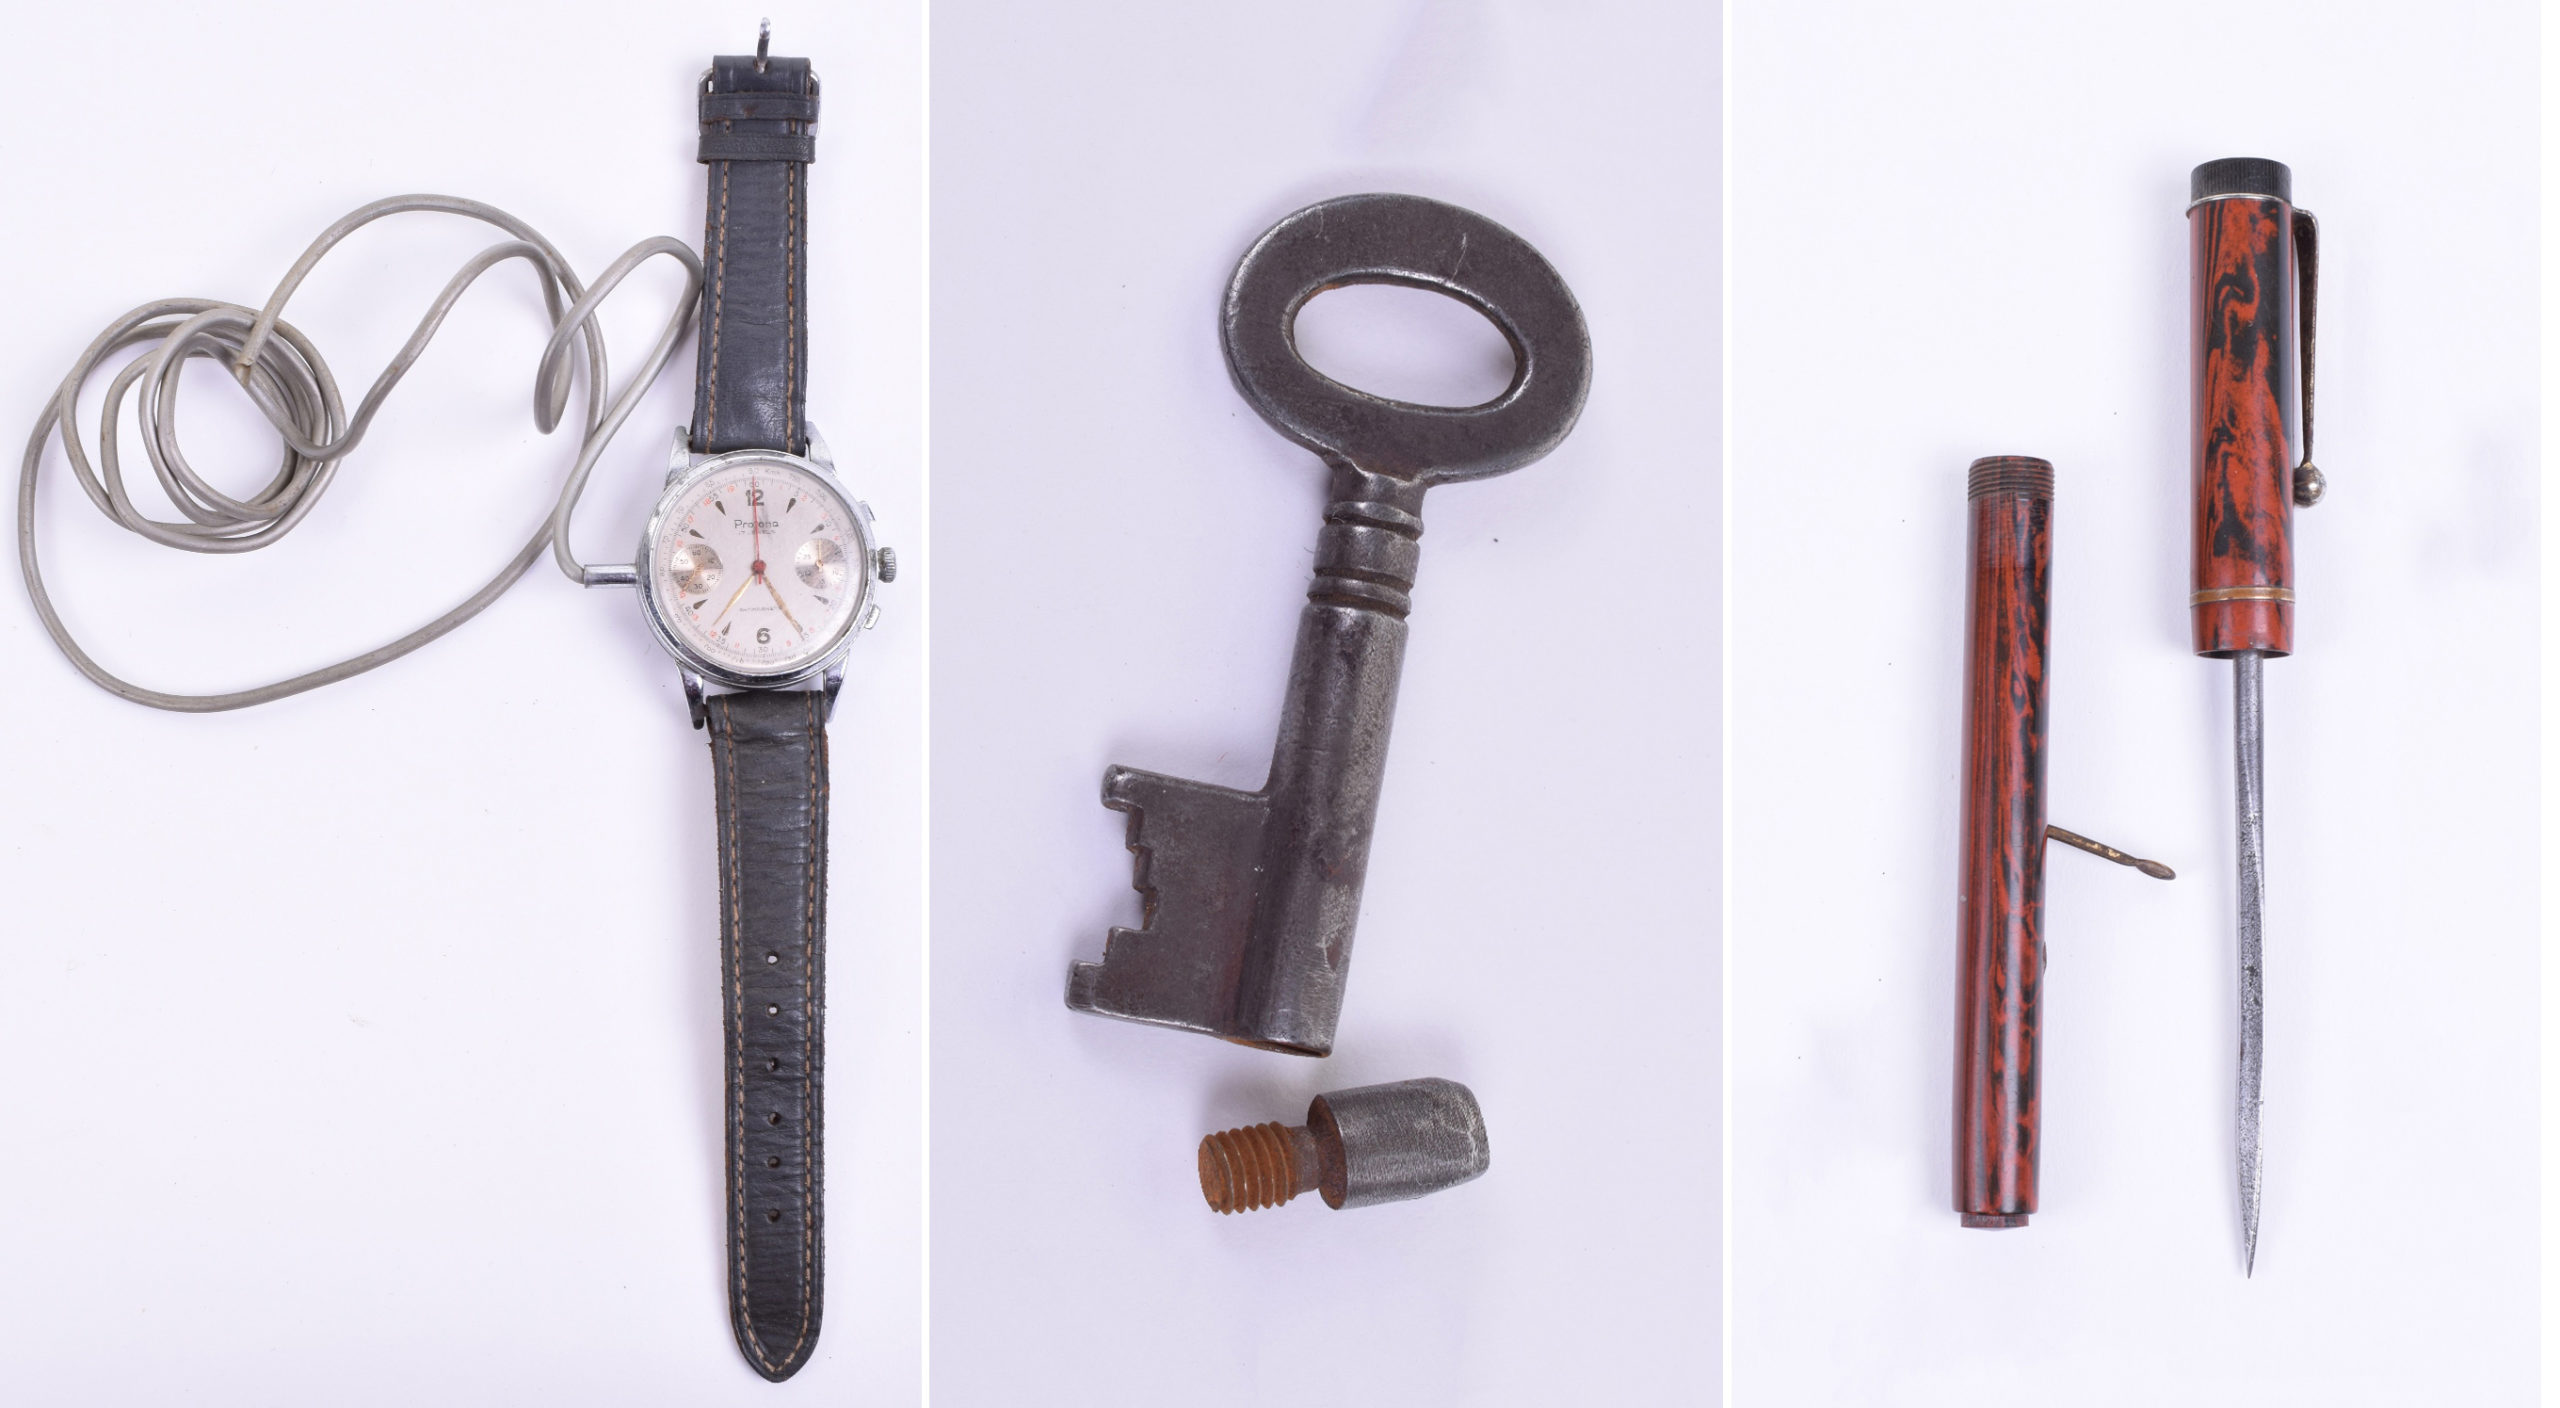 Buy These World War II Spy Gadgets But Don't Tell Anyone